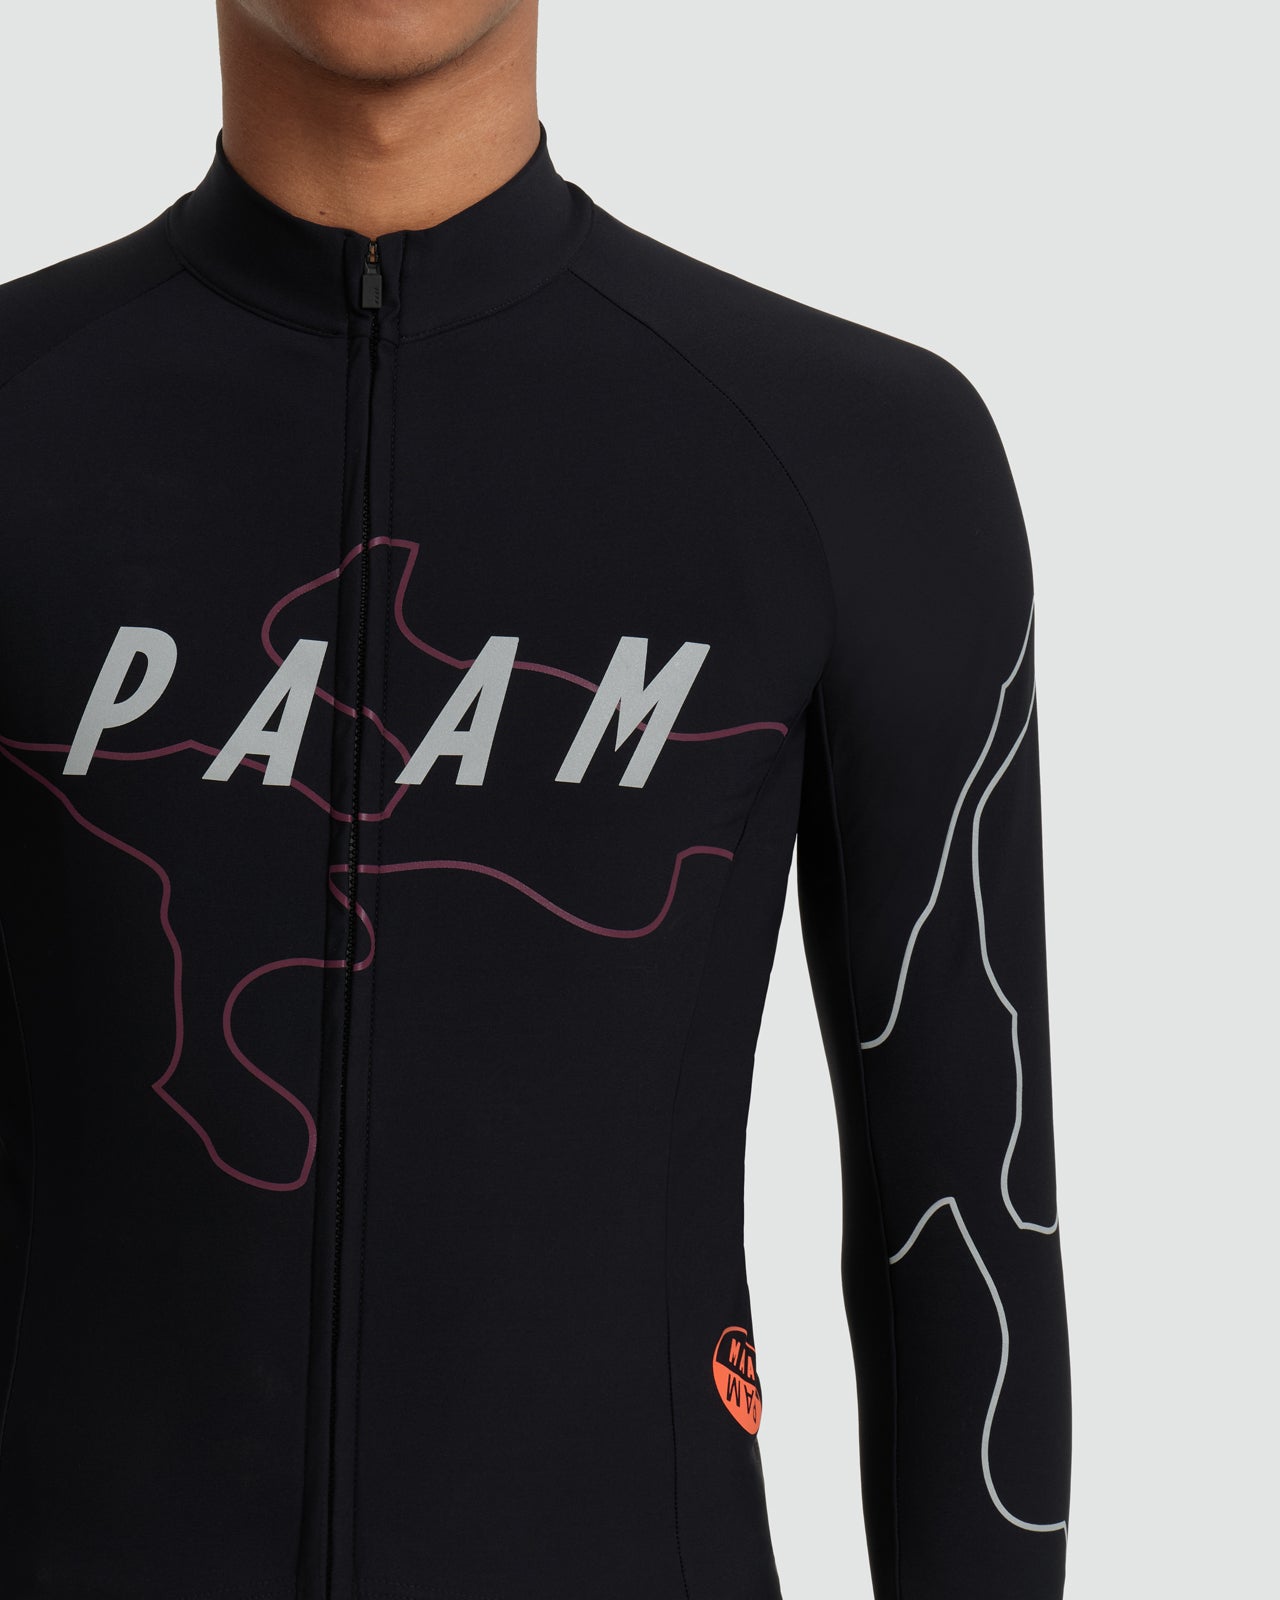 MAAP X PAM Thermal LS Jersey